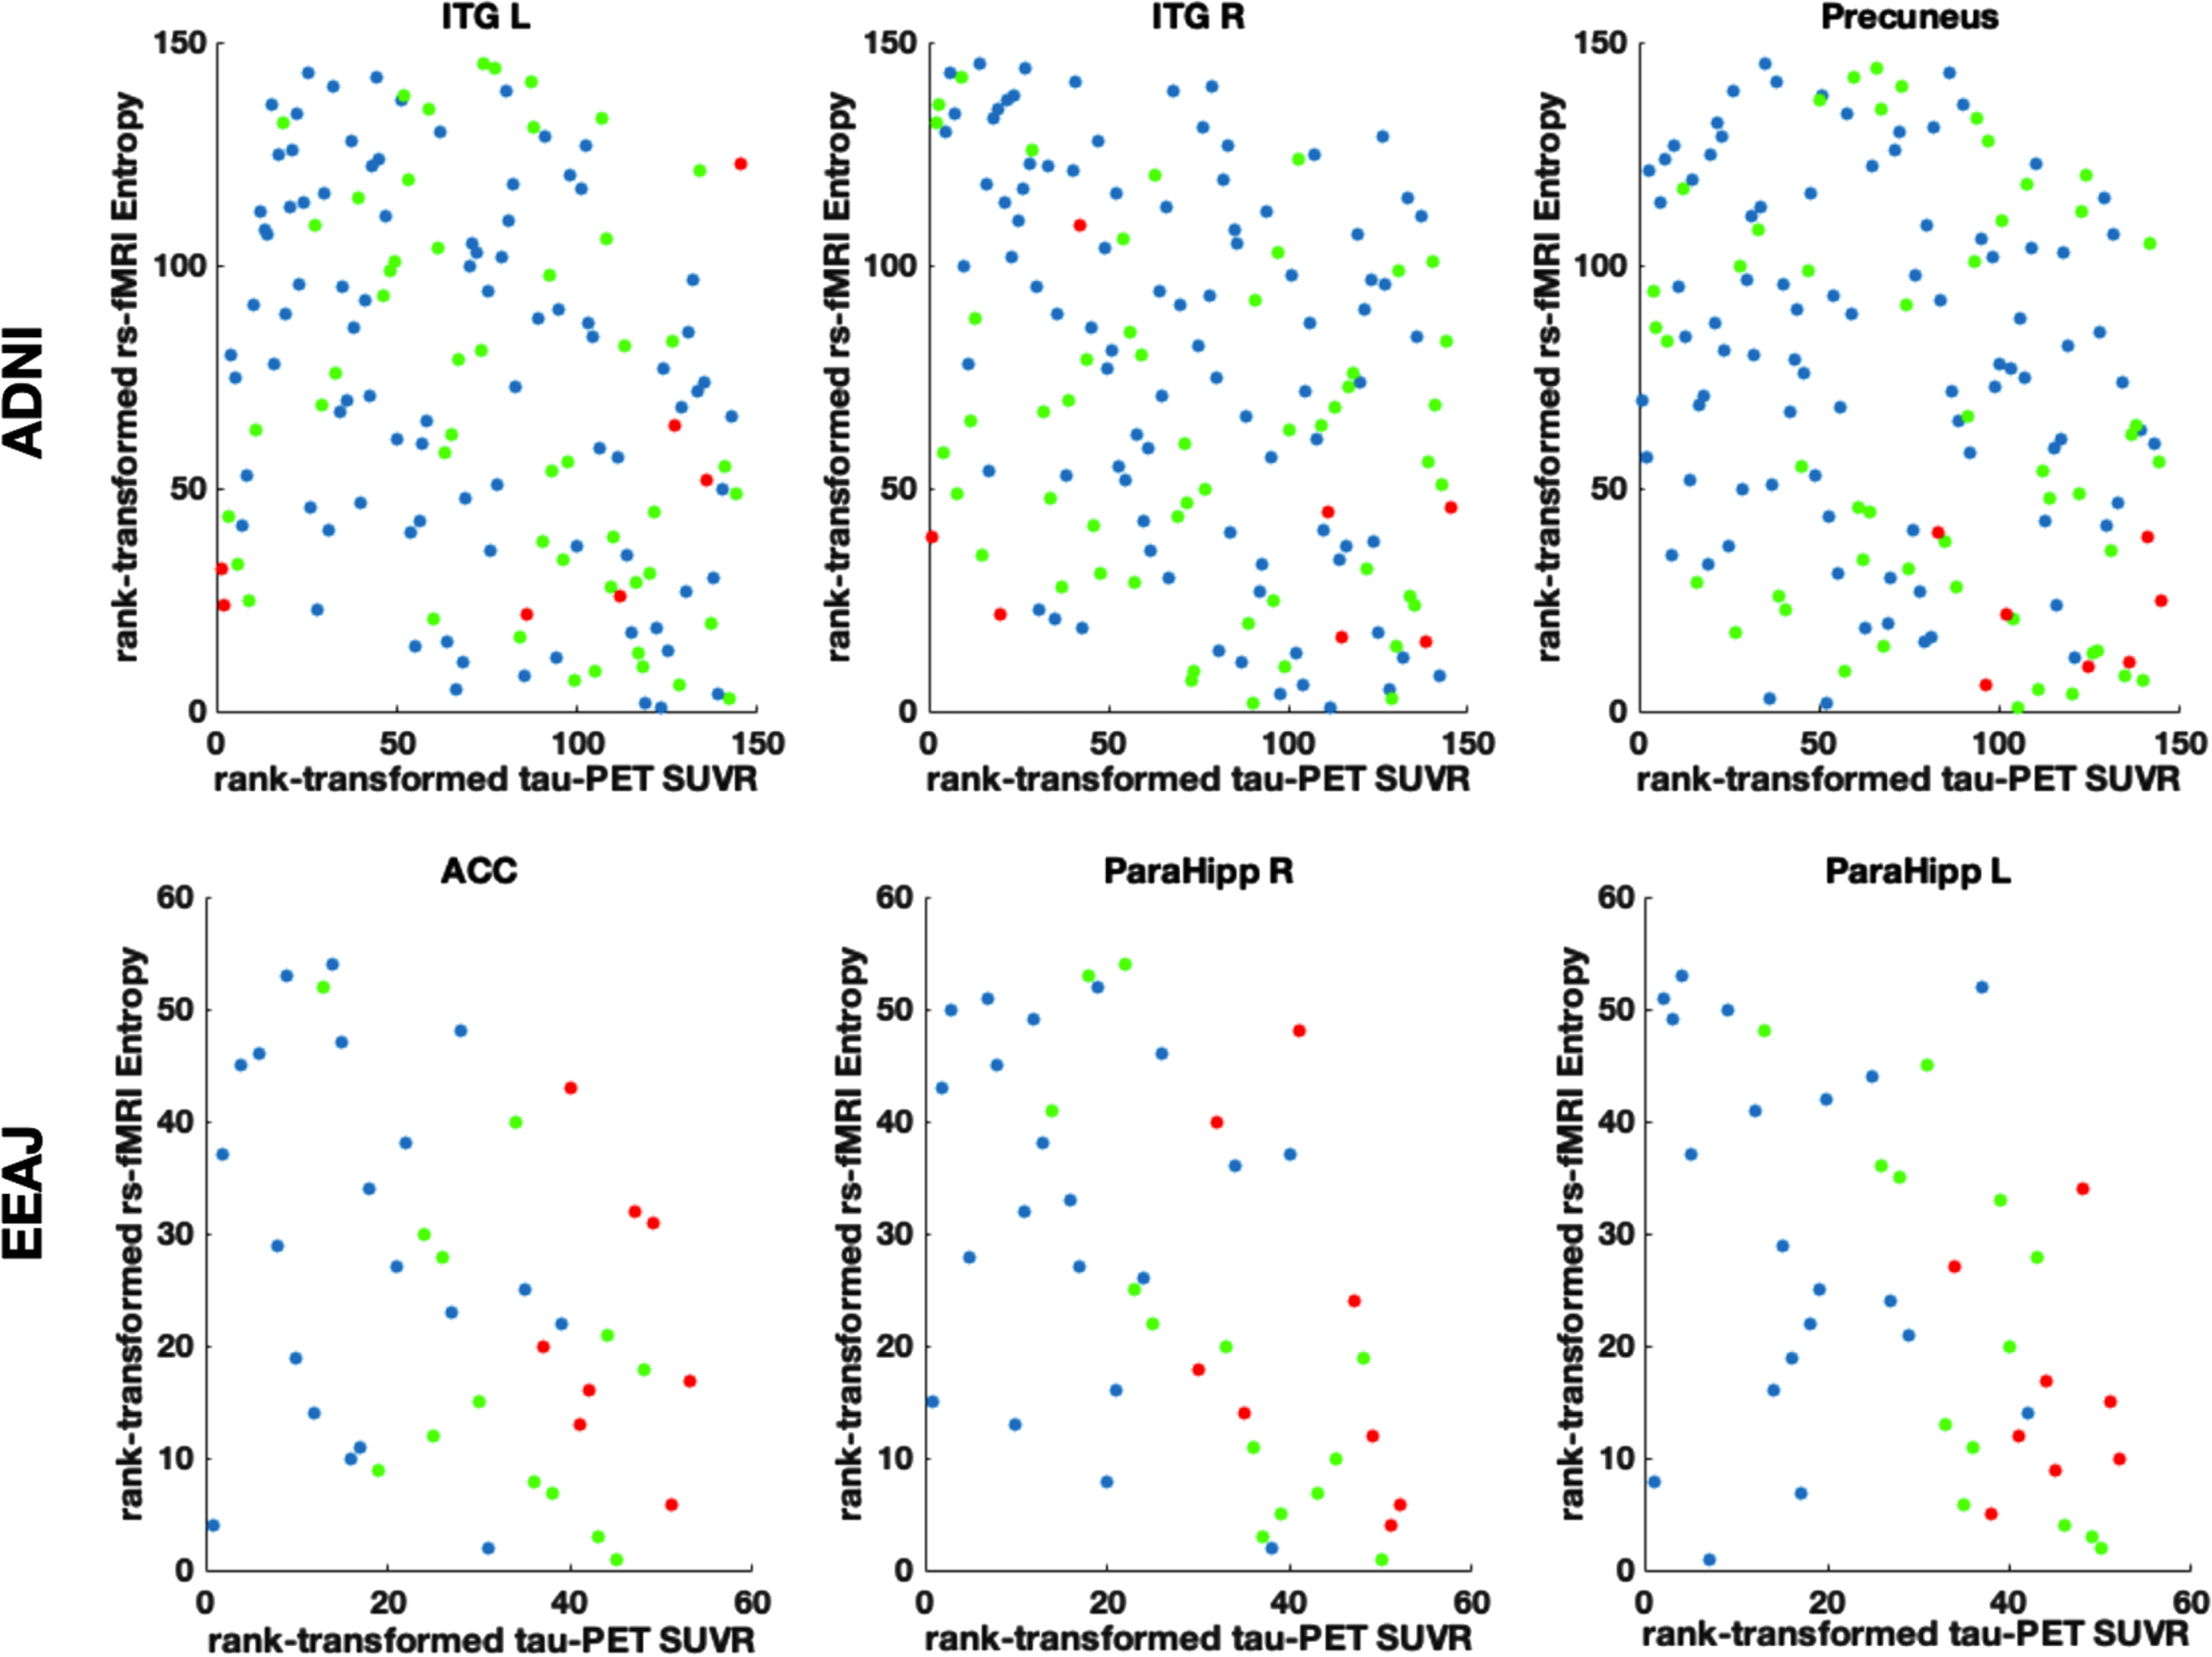 Scatter plots in three selected regions of interest (ROIs) displaying the relation between rank transformed rs-fMRI complexity and tau-PET SUVR values. ACC, anterior cingulate cortex; ITG R/L, inferior temporal gyrus left/right; ParaHipp L/R, parahippocampal gyrus left/right. Partial regression plots for these data including adjustments for covariates of age and gender can be seen in Supplementary Figure 7.